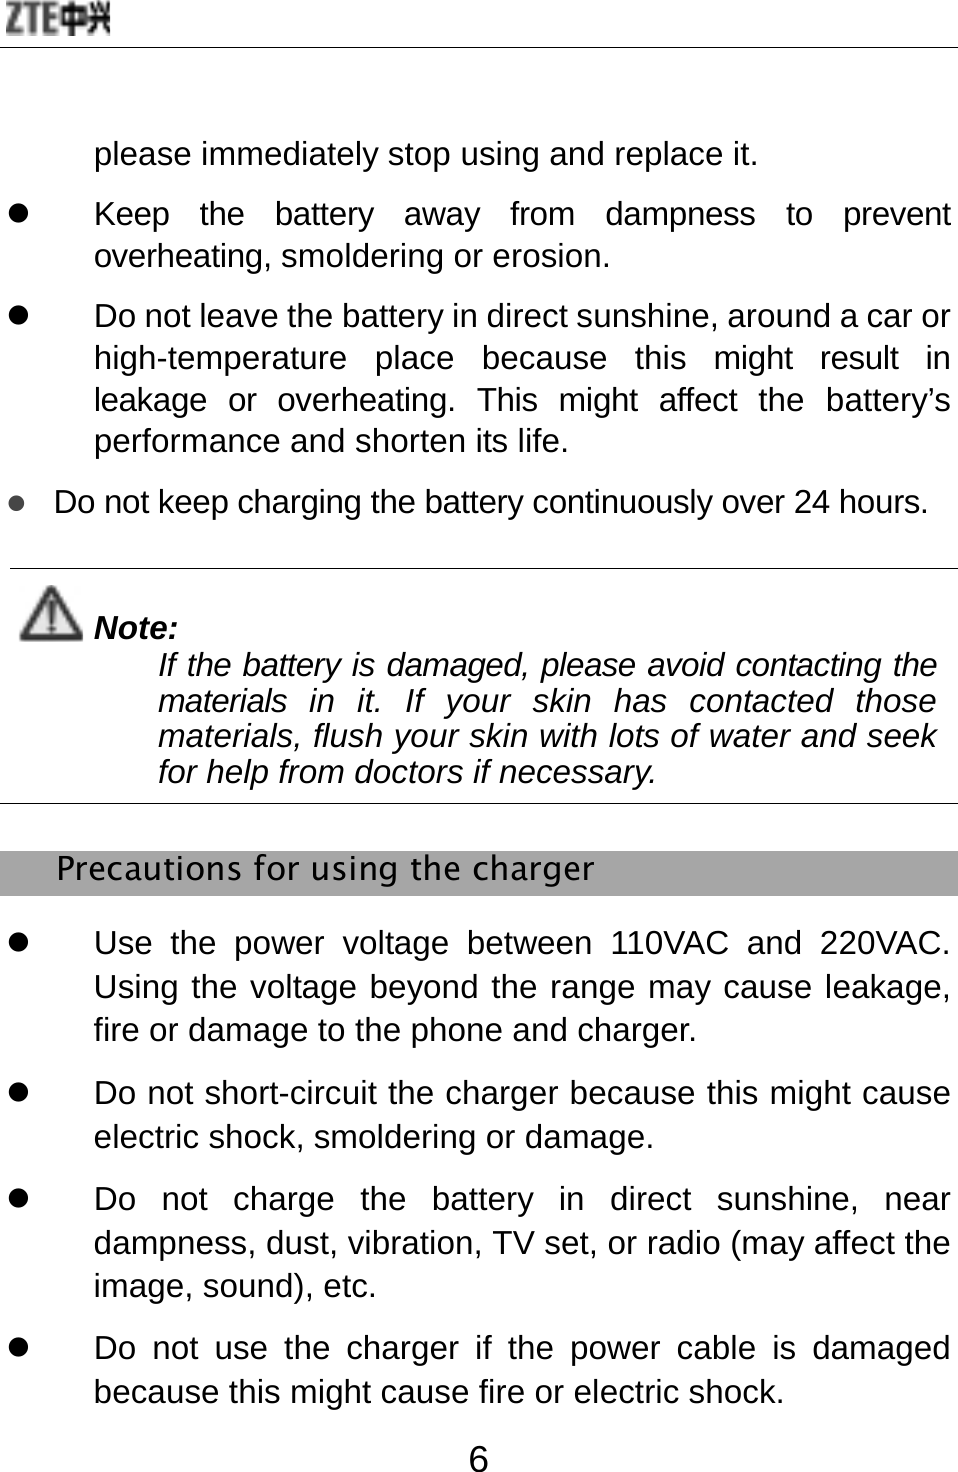  6 please immediately stop using and replace it. z  Keep the battery away from dampness to prevent overheating, smoldering or erosion. z  Do not leave the battery in direct sunshine, around a car or high-temperature place because this might result in leakage or overheating. This might affect the battery’s performance and shorten its life. z Do not keep charging the battery continuously over 24 hours.  Note: If the battery is damaged, please avoid contacting the materials in it. If your skin has contacted those materials, flush your skin with lots of water and seek for help from doctors if necessary.  Precautions for using the charger z  Use the power voltage between 110VAC and 220VAC. Using the voltage beyond the range may cause leakage, fire or damage to the phone and charger. z  Do not short-circuit the charger because this might cause electric shock, smoldering or damage. z  Do not charge the battery in direct sunshine, near dampness, dust, vibration, TV set, or radio (may affect the image, sound), etc. z  Do not use the charger if the power cable is damaged because this might cause fire or electric shock. 